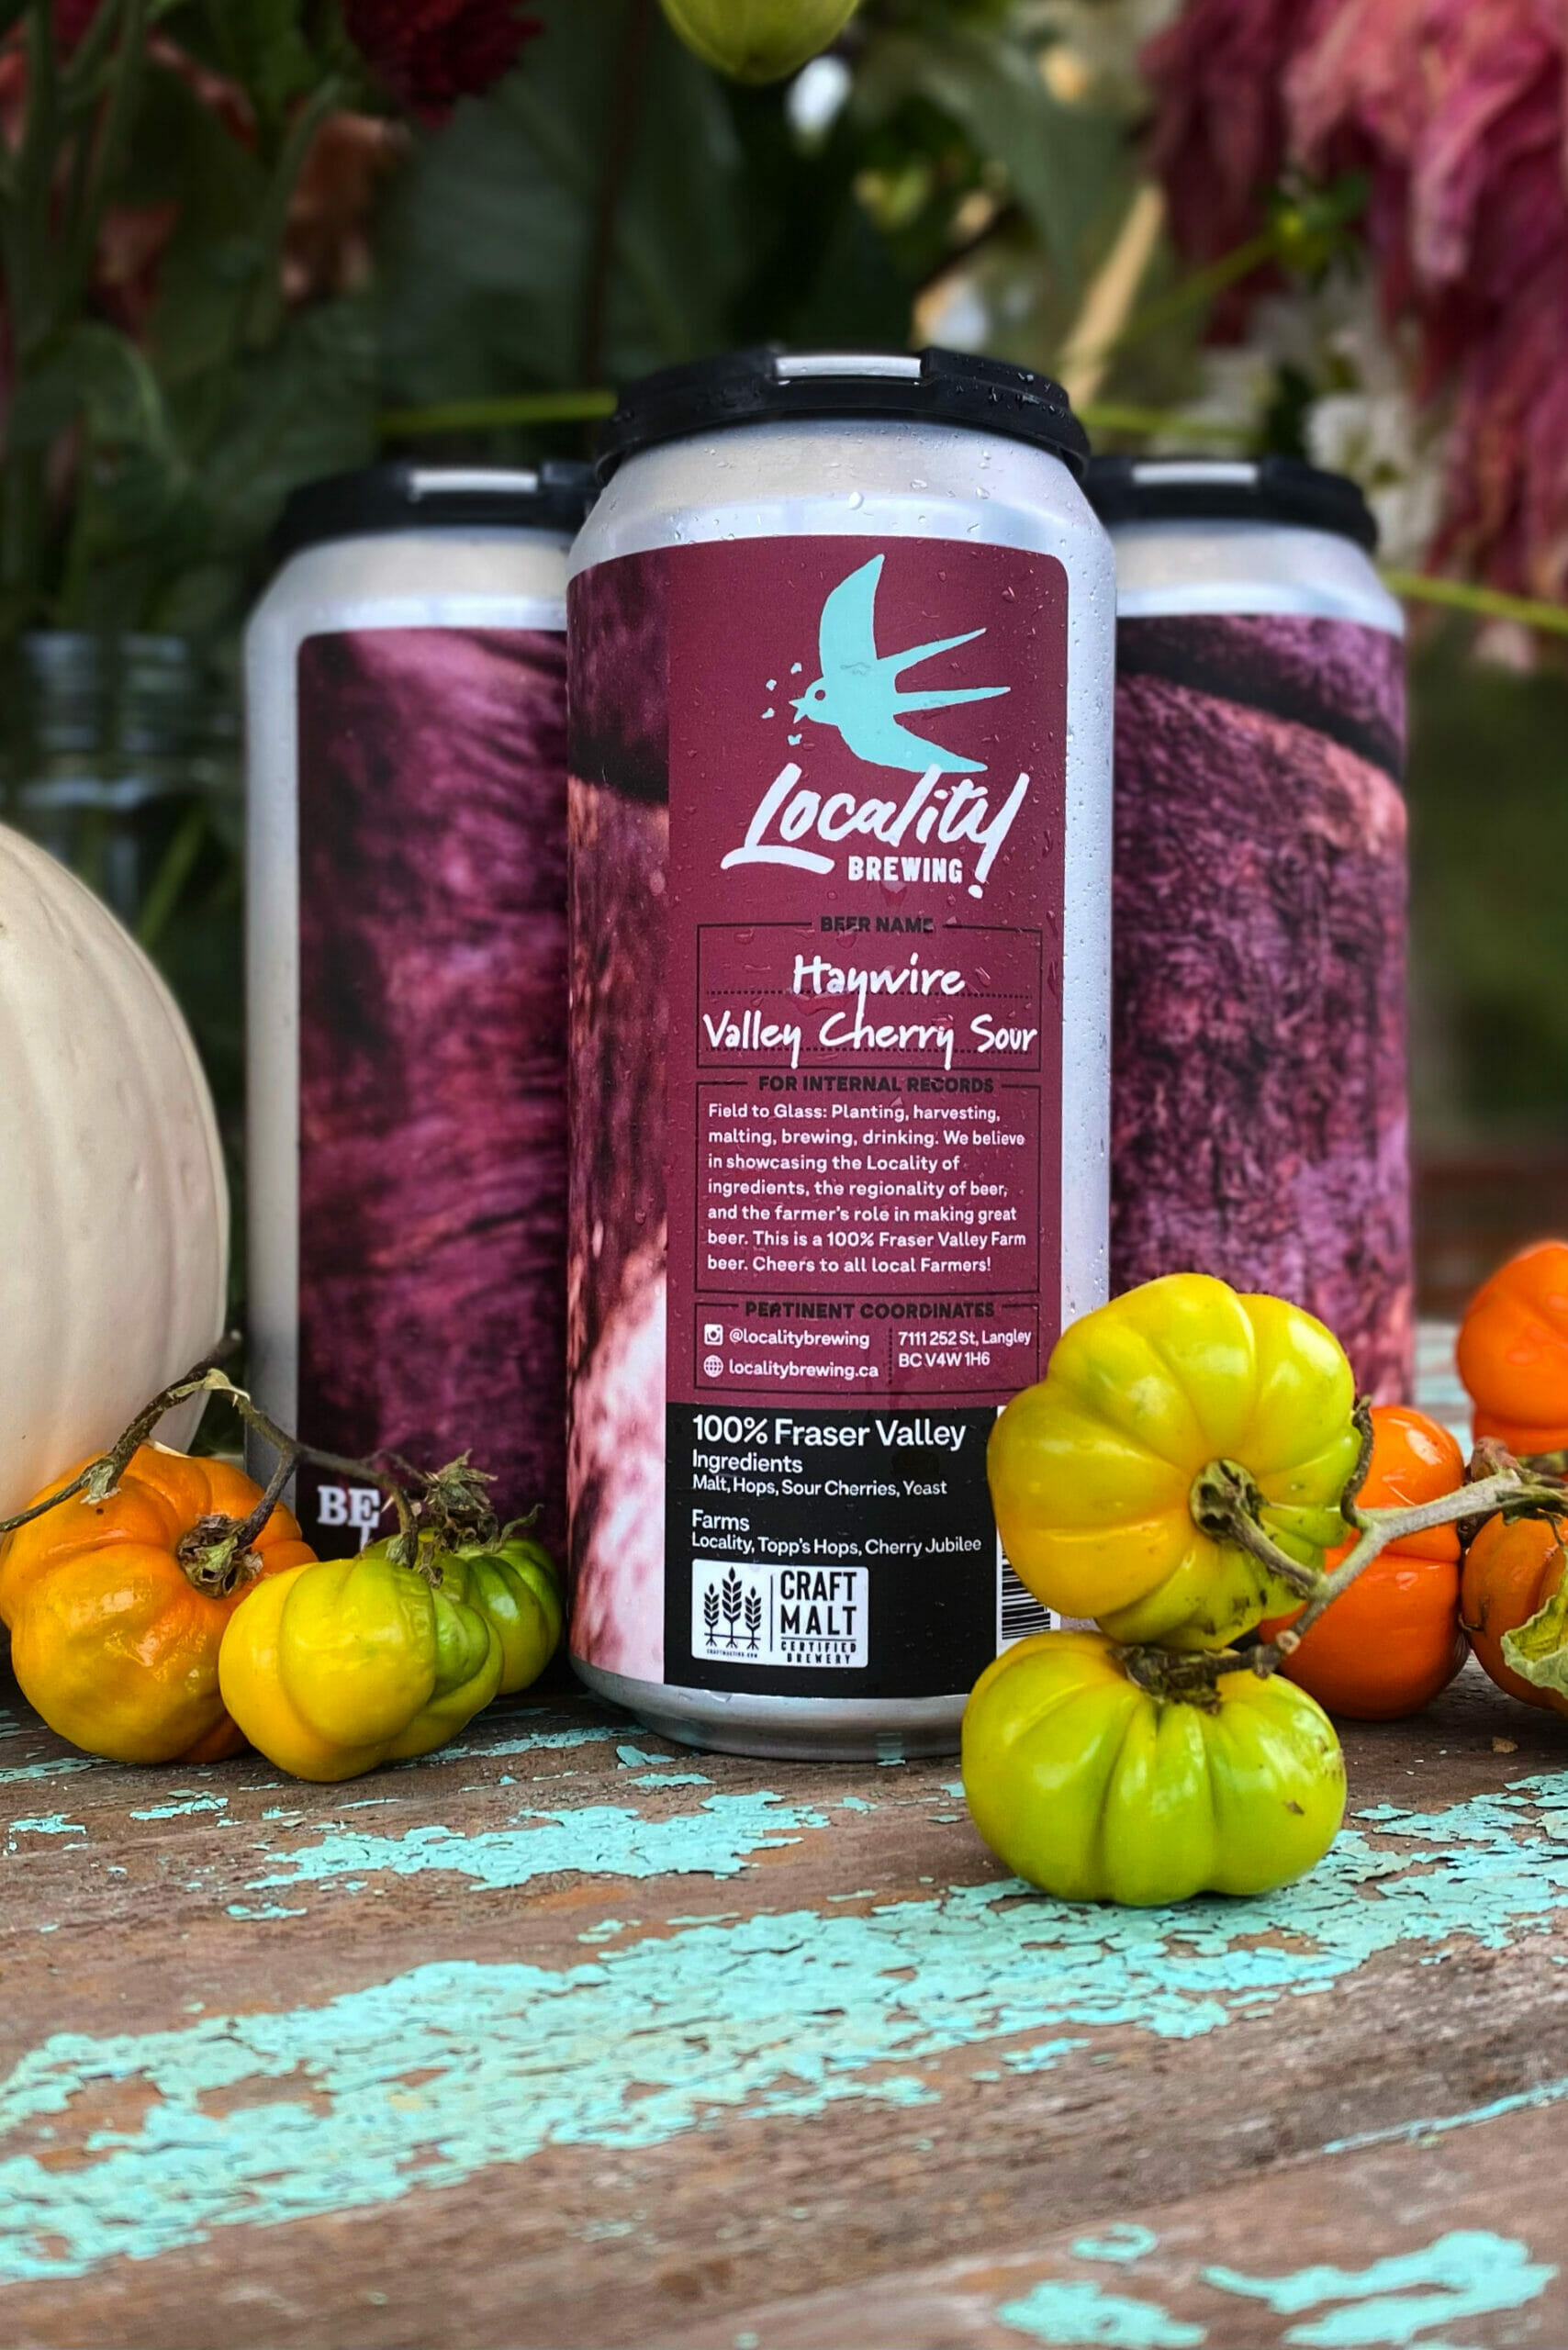 Haywire Valley Cherry Sour - Locality Brewing